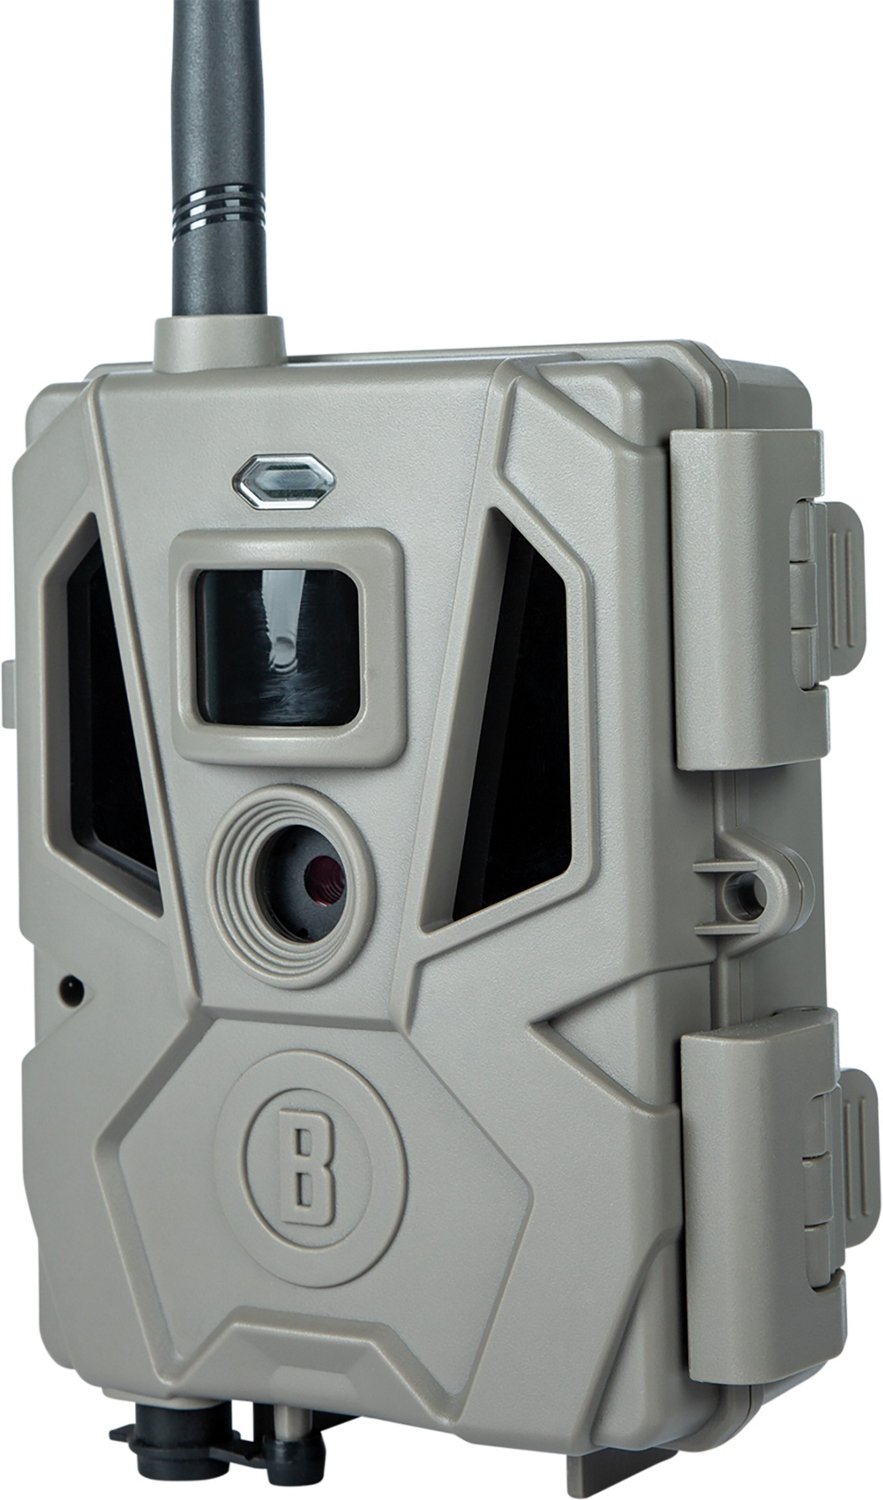 Bushnell CelluCORE 20 No Glow 20 MP Cellular Trail Camera | Academy